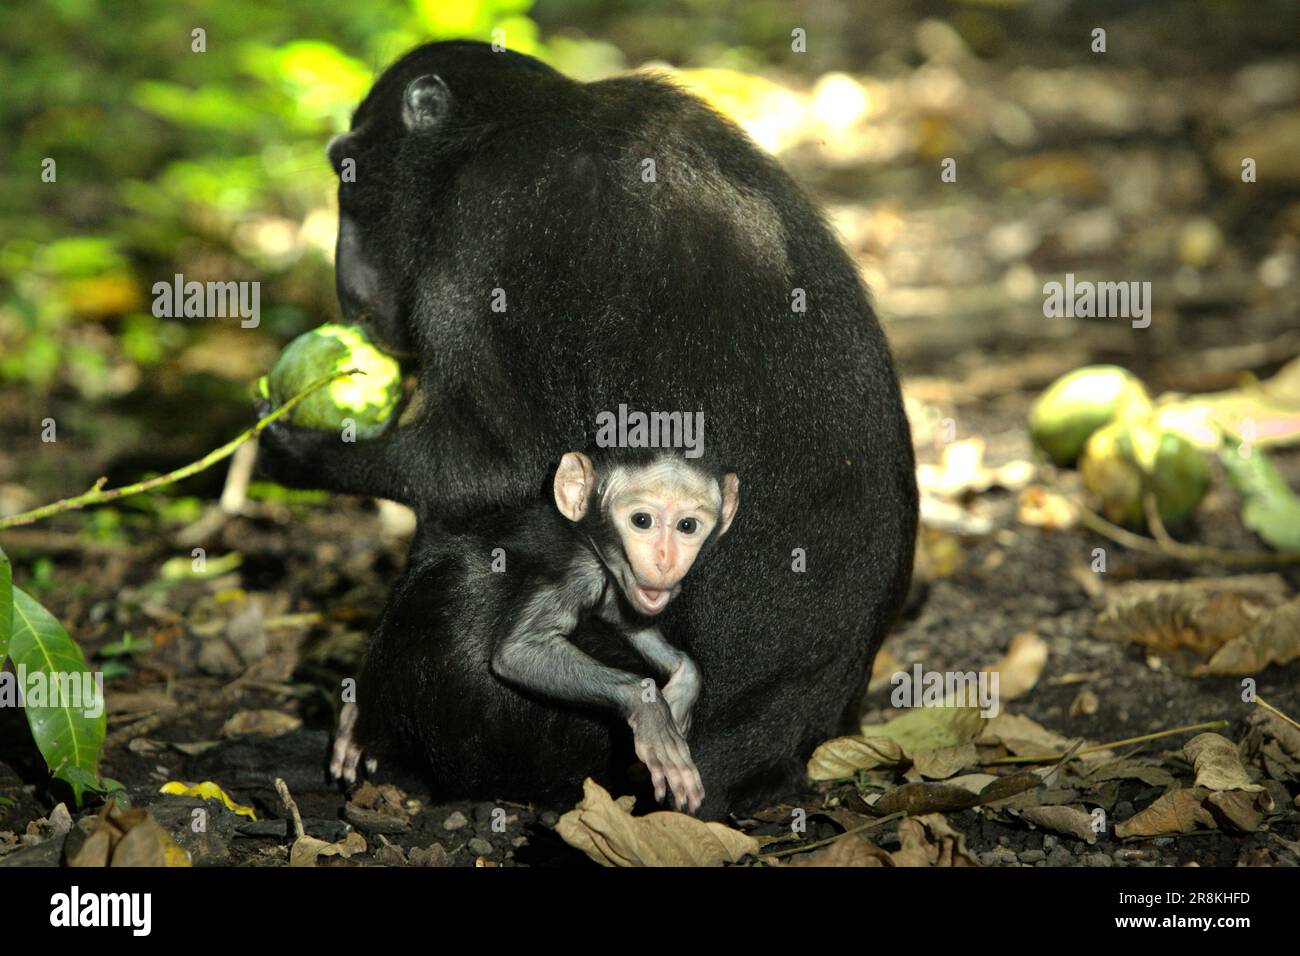 An offspring of Sulawesi black-crested macaque (Macaca nigra) stares at camera as it is being taken care of its mother, that is having a fruit while sitting on the ground in Tangkoko forest, North Sulawesi, Indonesia. Being one of the 25 most endangered primates on earth, Macaca nigra is predicted to be going extinct in 2050, according to the website of Macaca Nigra Project. The species is facing the threats of poaching, habitat loss, and climate change. Stock Photo